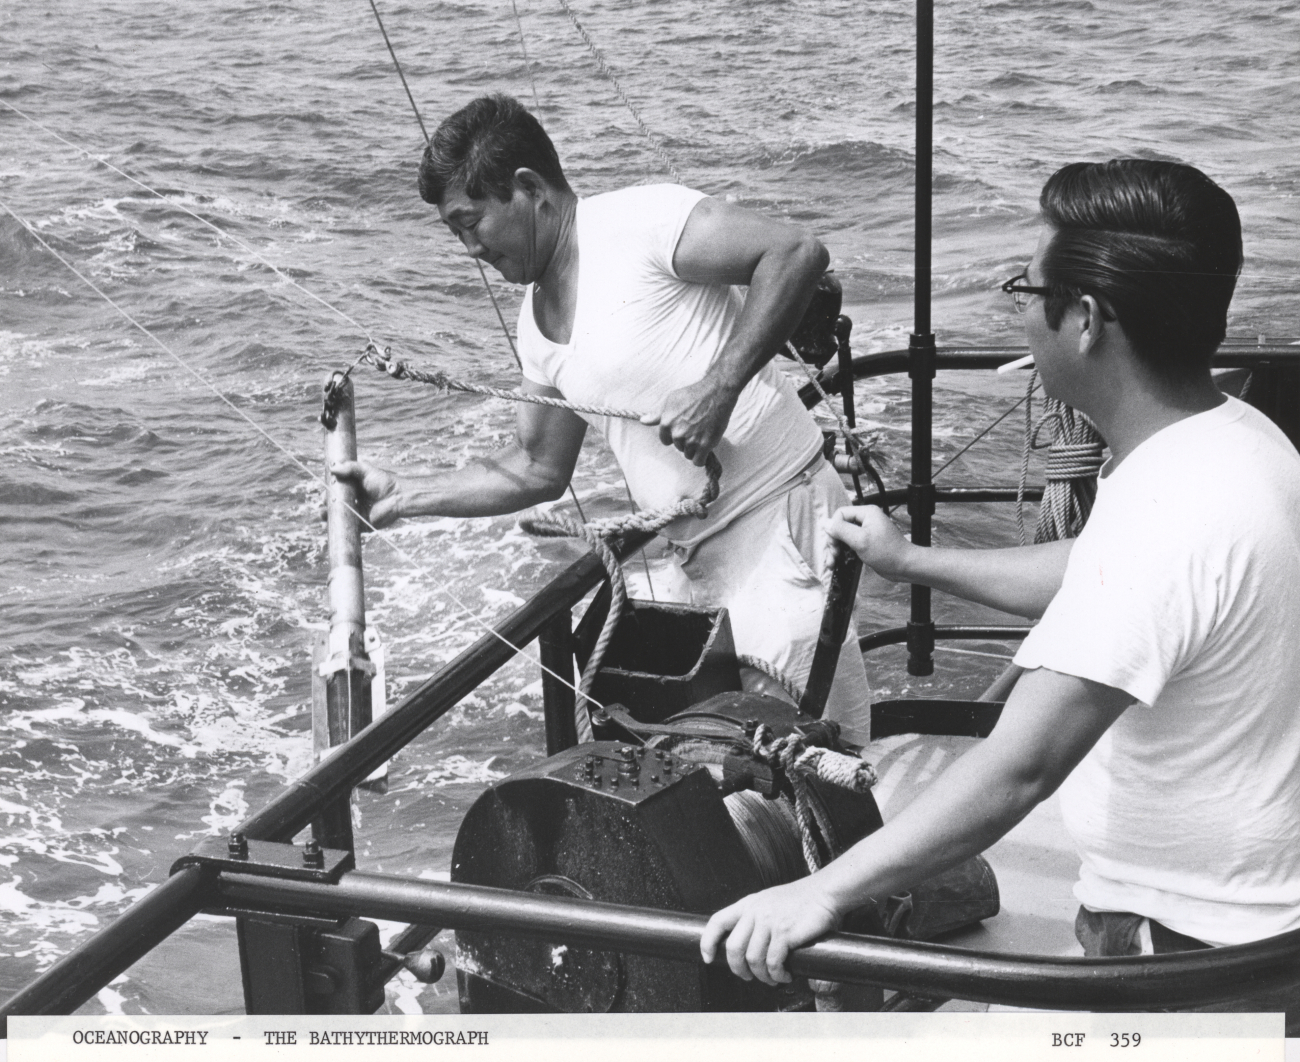 Deploying a bathythermograph from a fisheries research vessel